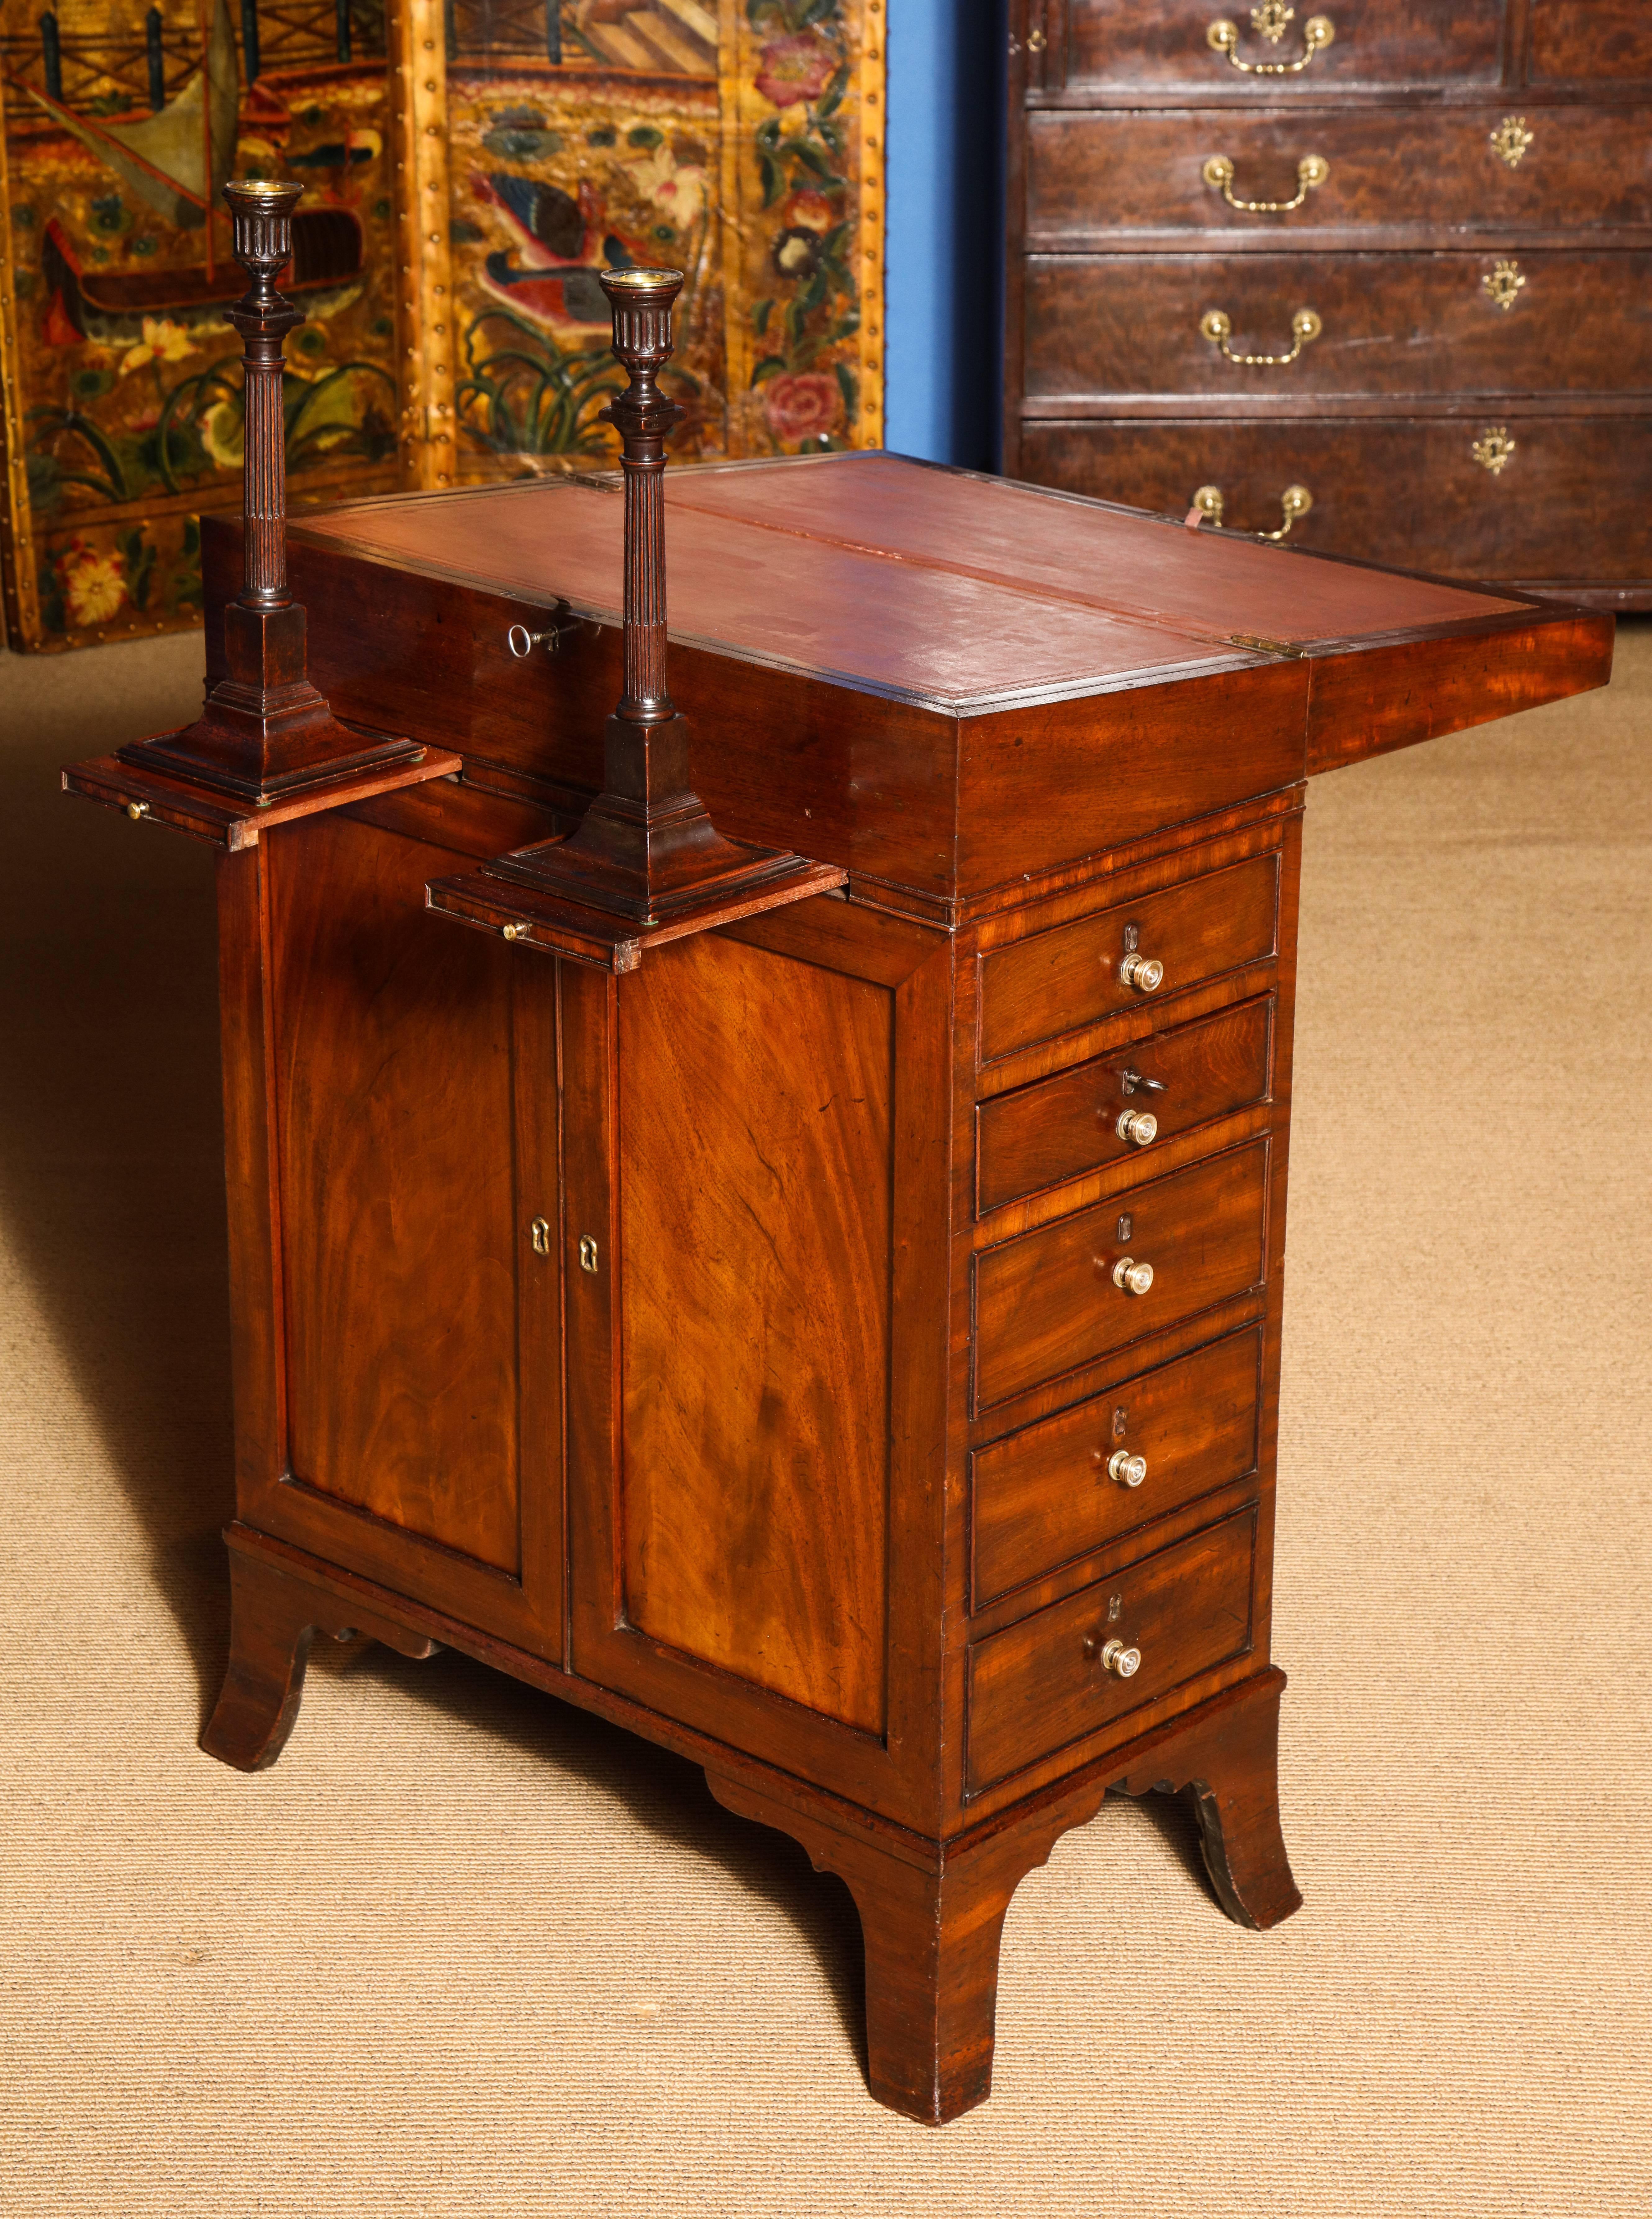 Regency Mahogany Hinger Davenport Desk with Hidden Compartments, circa 1800 In Excellent Condition For Sale In New York, NY